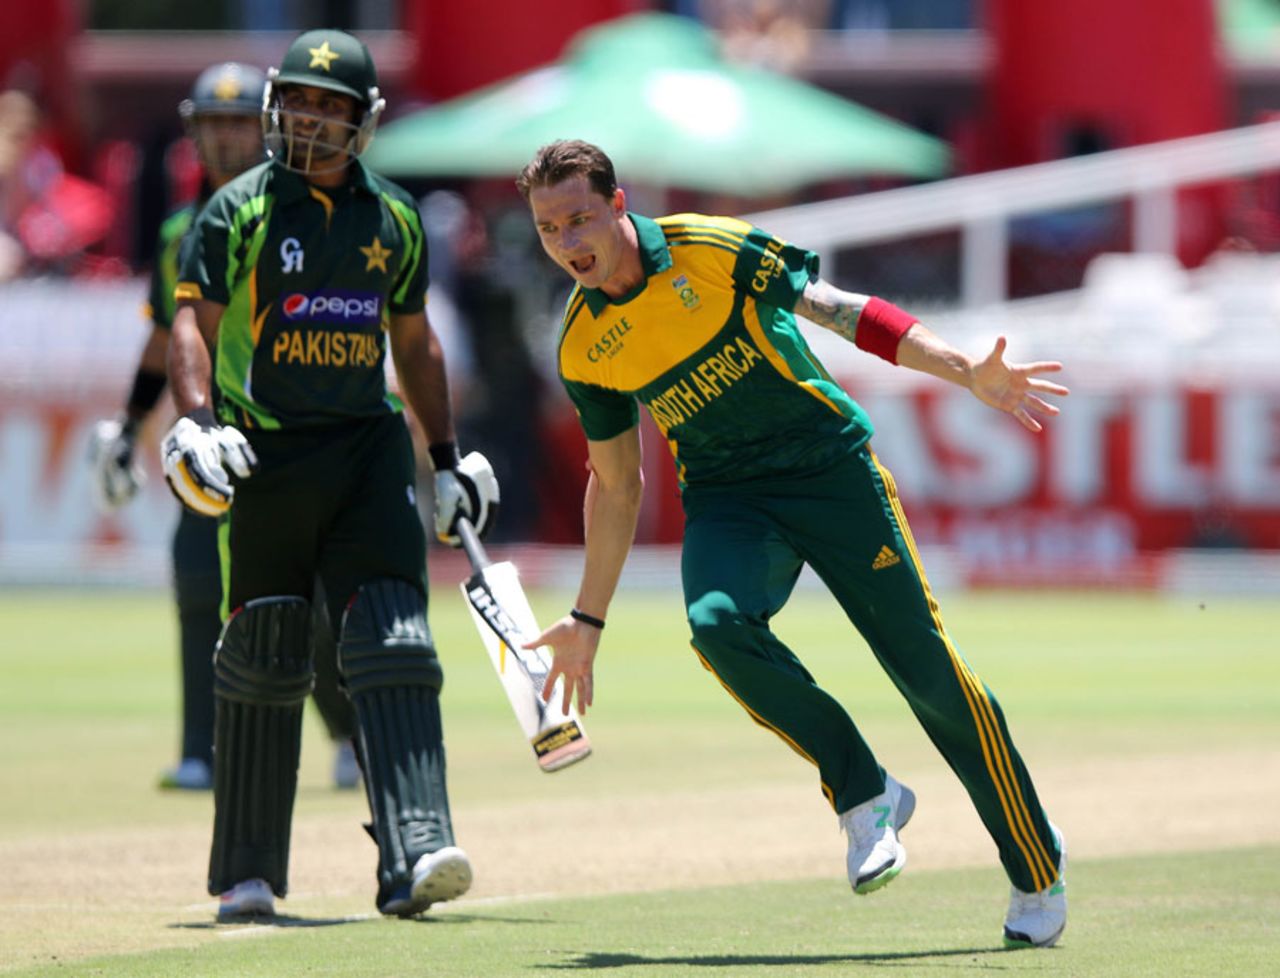 Dale Steyn picked up three wickets for 33 runs, South Africa v Pakistan, 1st ODI, Cape Town, November 24, 2013